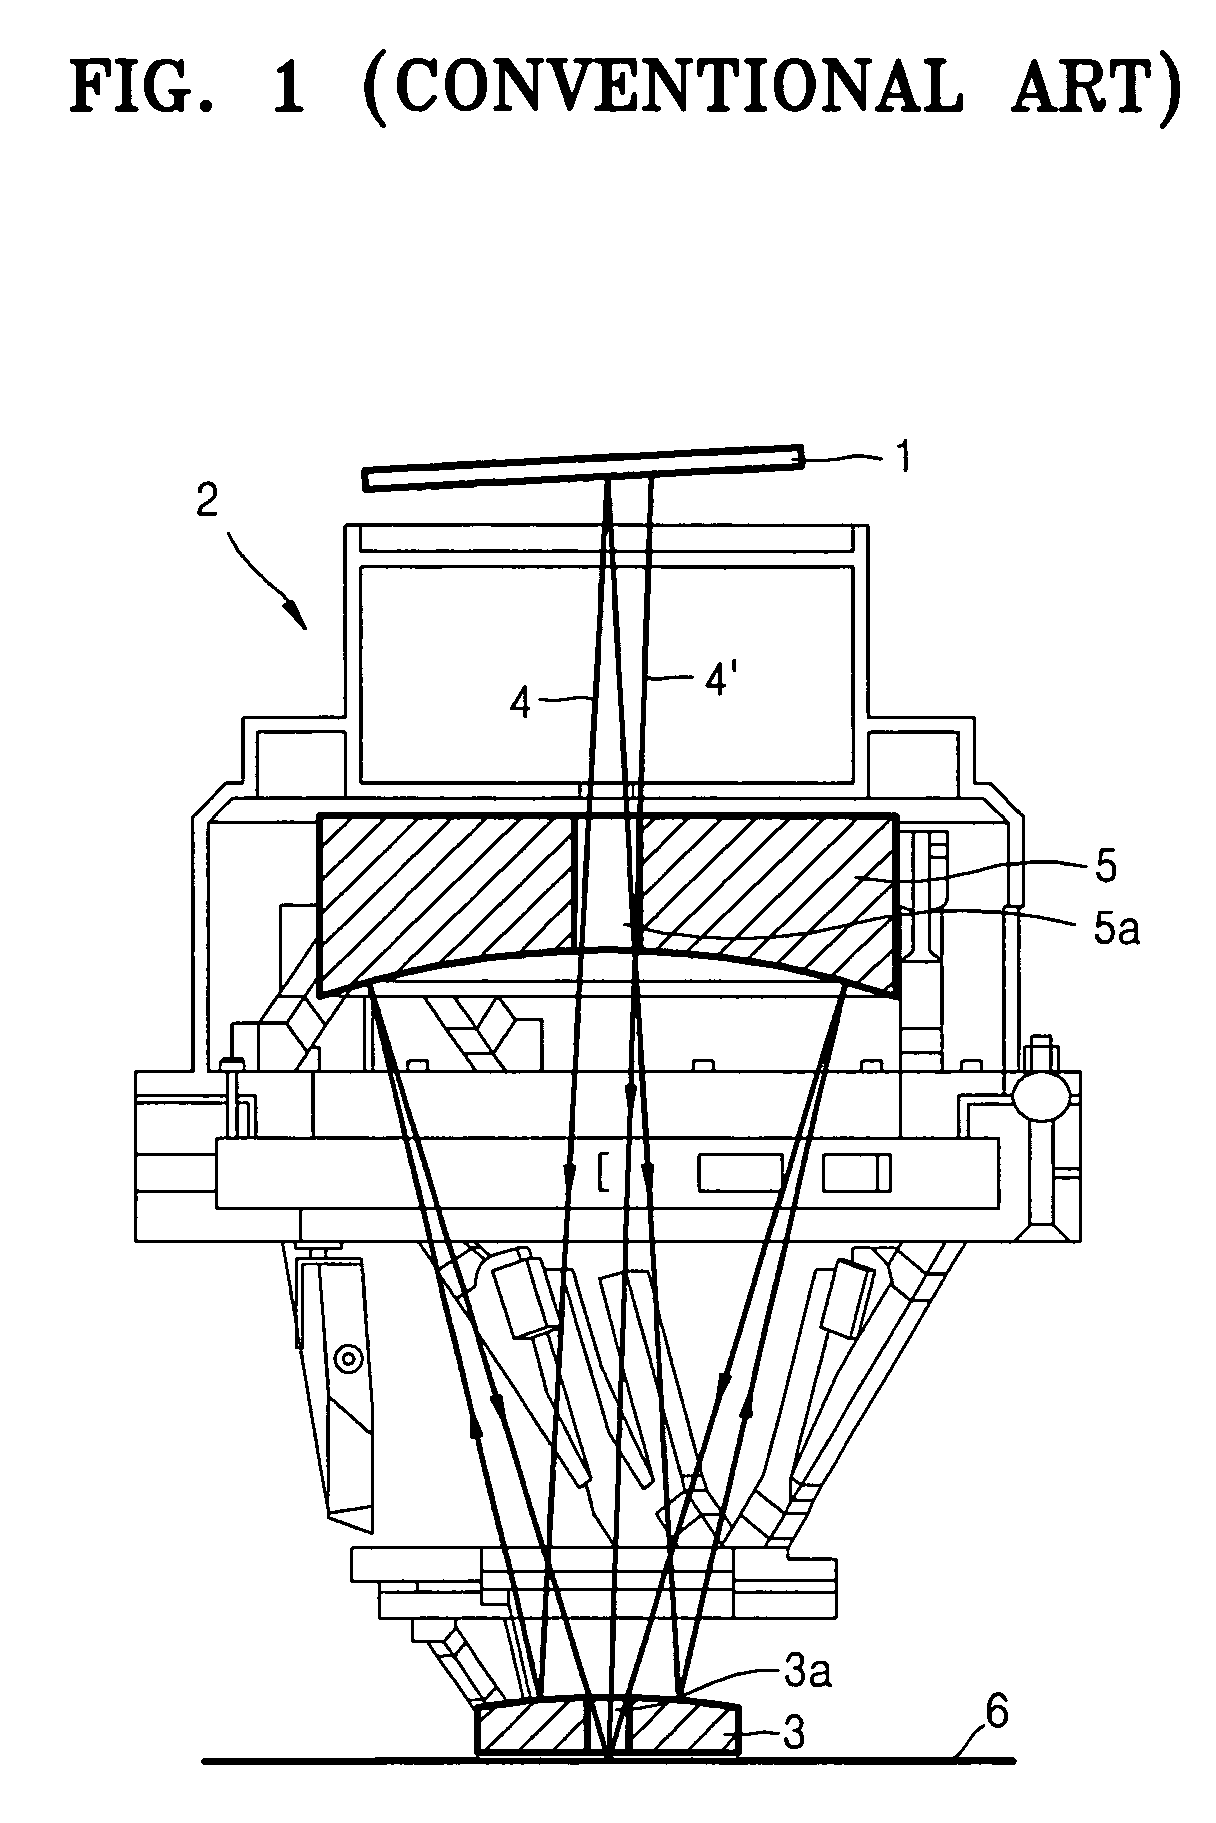 Off-axis projection optical system and extreme ultraviolet lithography apparatus using the same